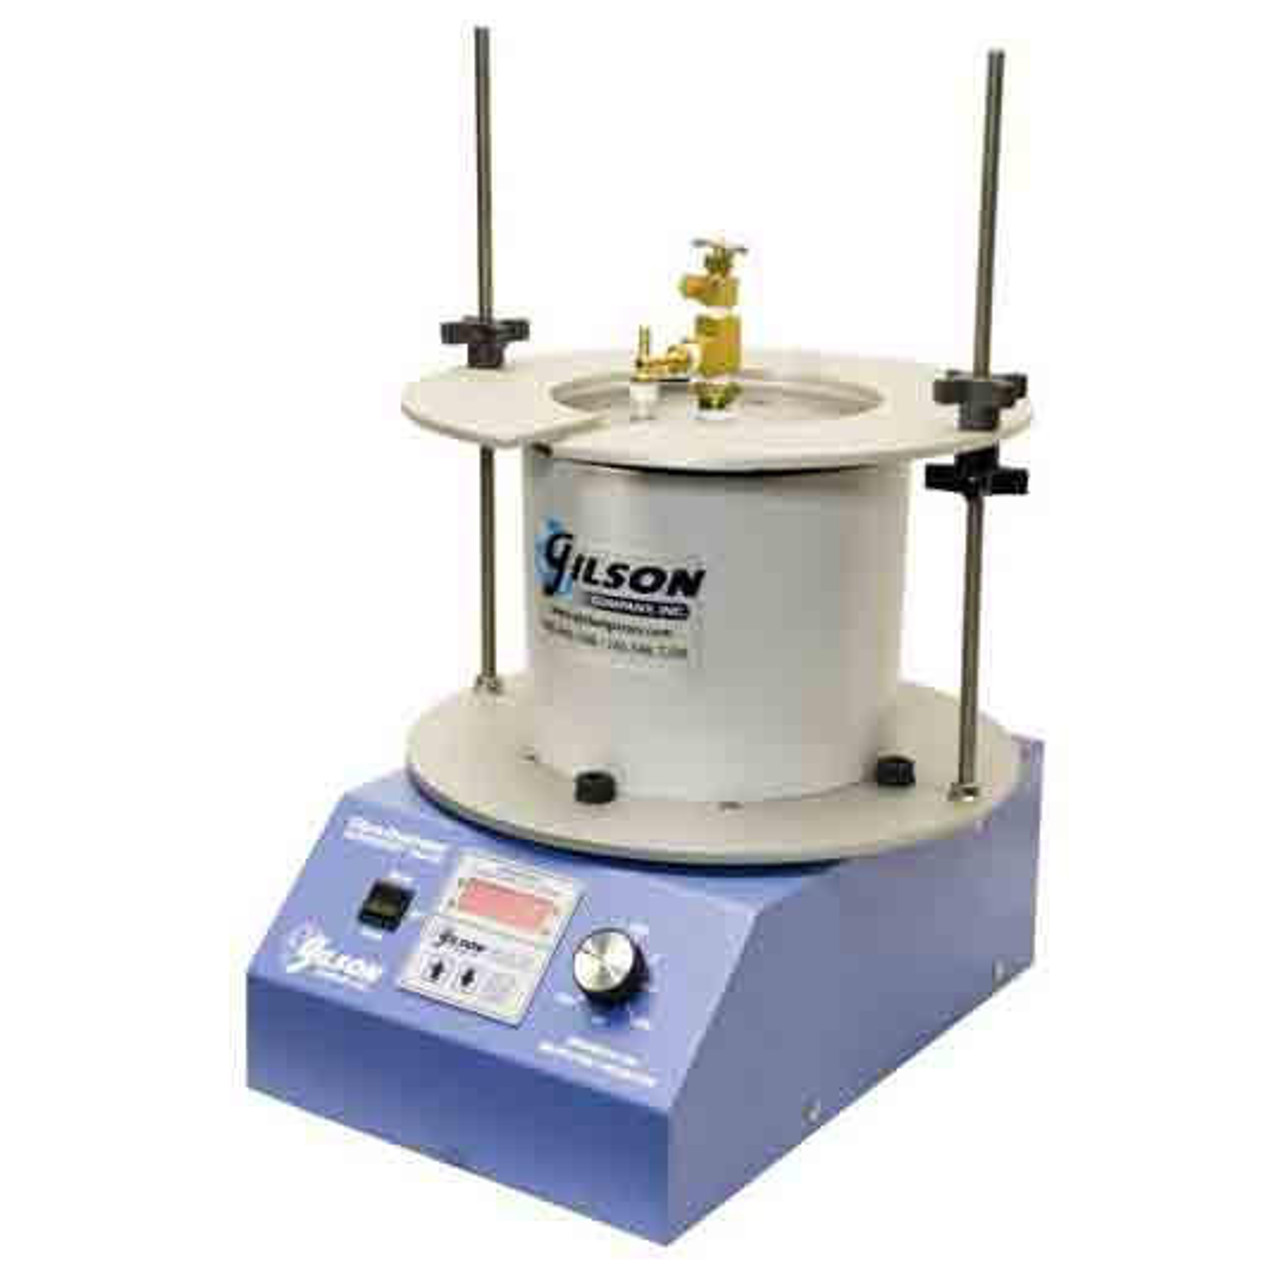 An image of a Mechanical Agitation Device used for rice testing